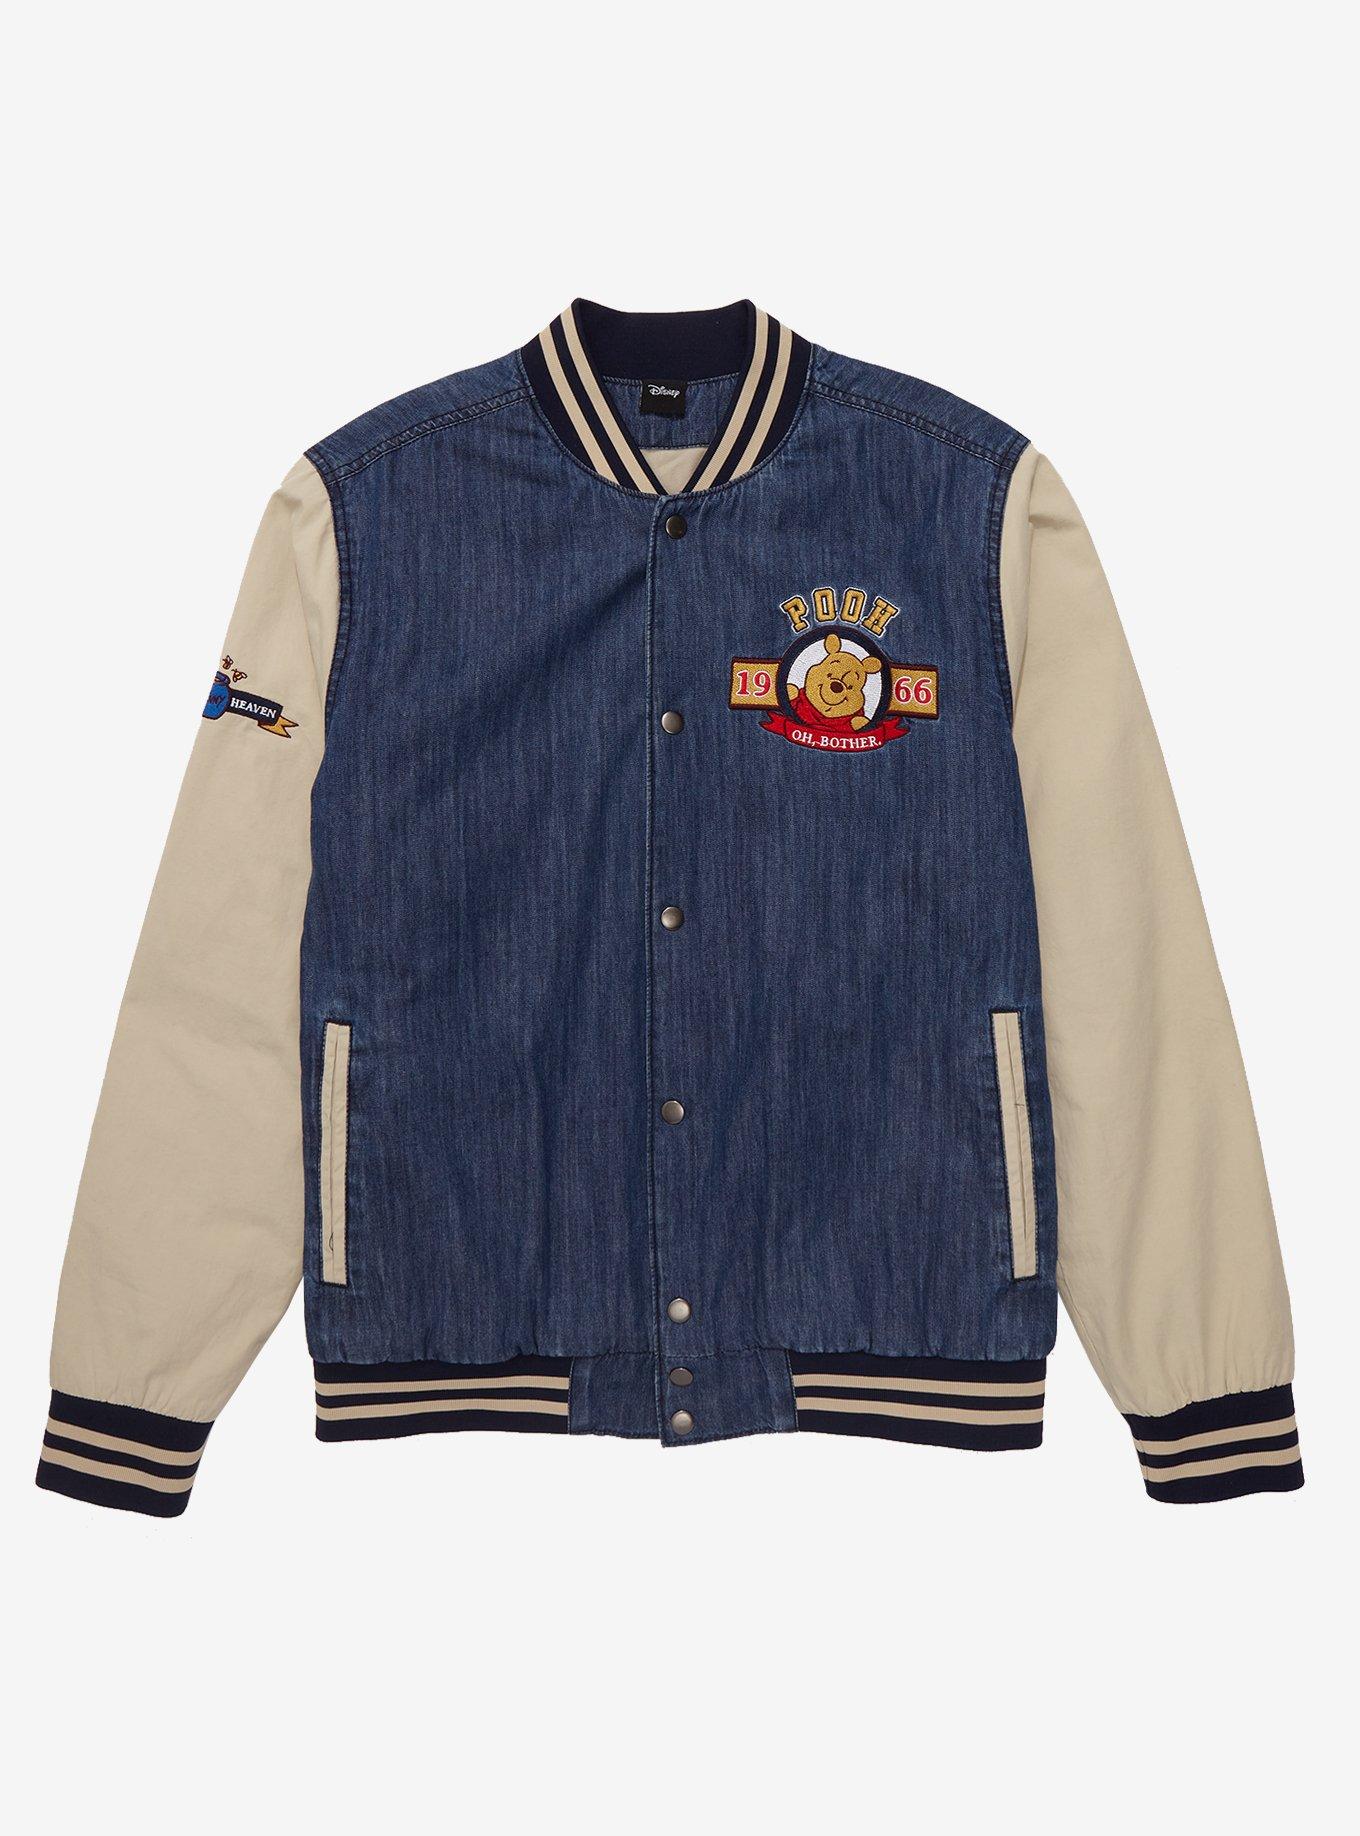 Capilla Marcar Oh querido Disney Winnie the Pooh Pooh & Friends Varsity Jacket - BoxLunch Exclusive |  BoxLunch